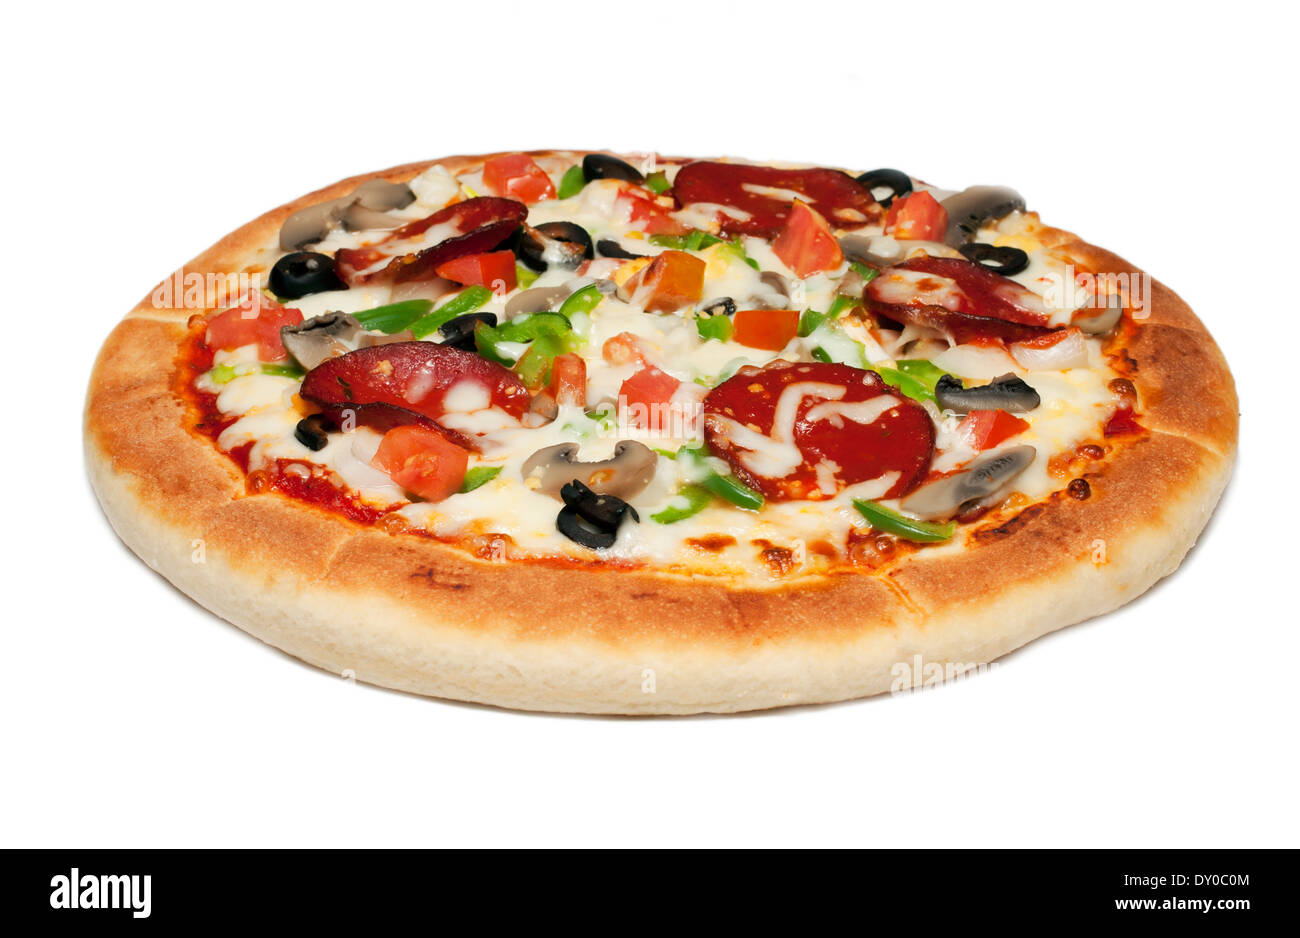 hot and spicy Italian tikka chicken pizza on a plate. Image isolated on white studio background. Stock Photo